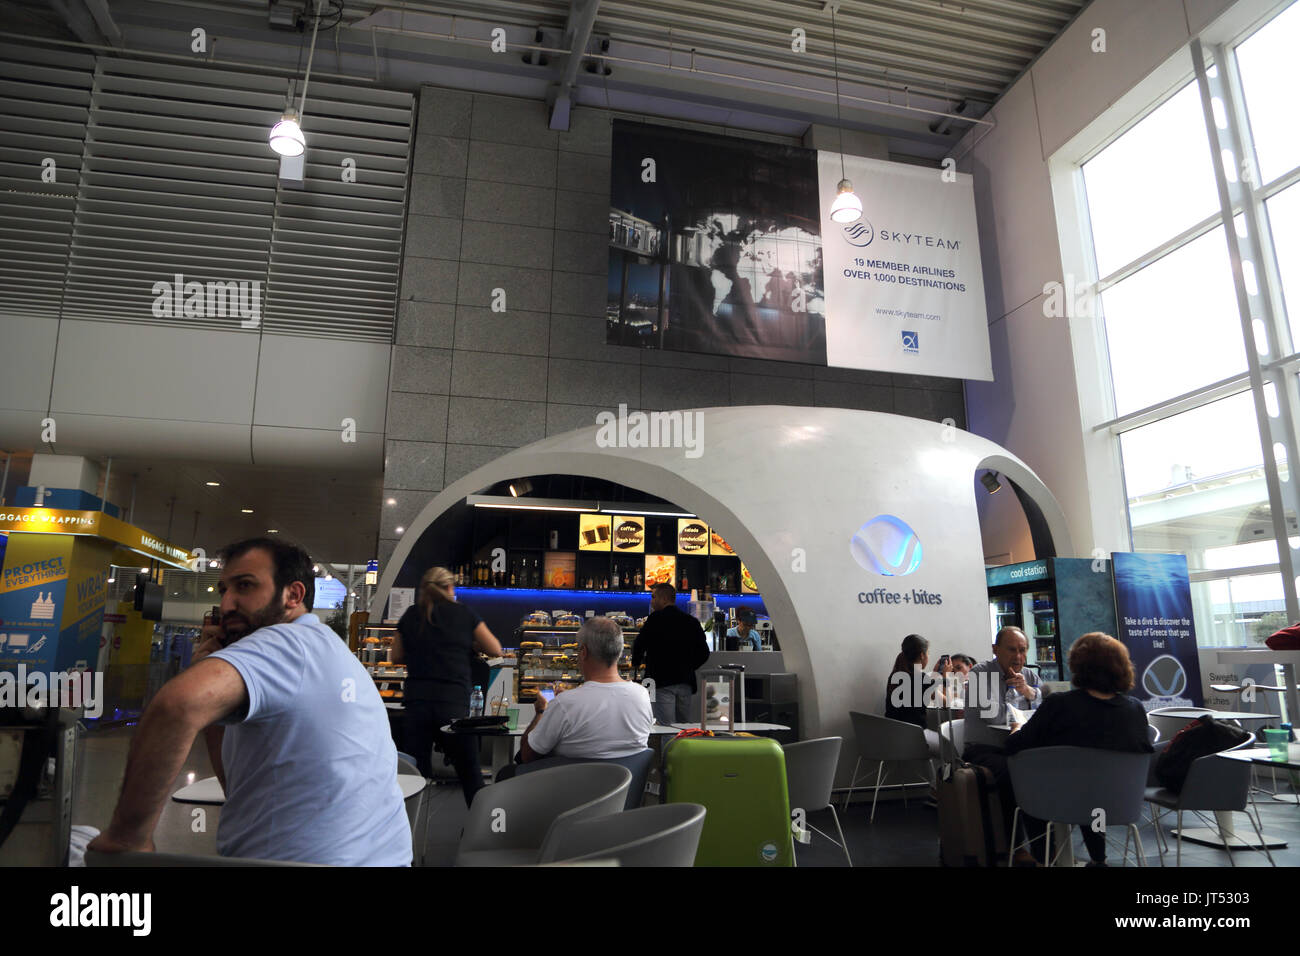 Athens Greece Athens Airport Coffee And Bites Cafe Stock Photo